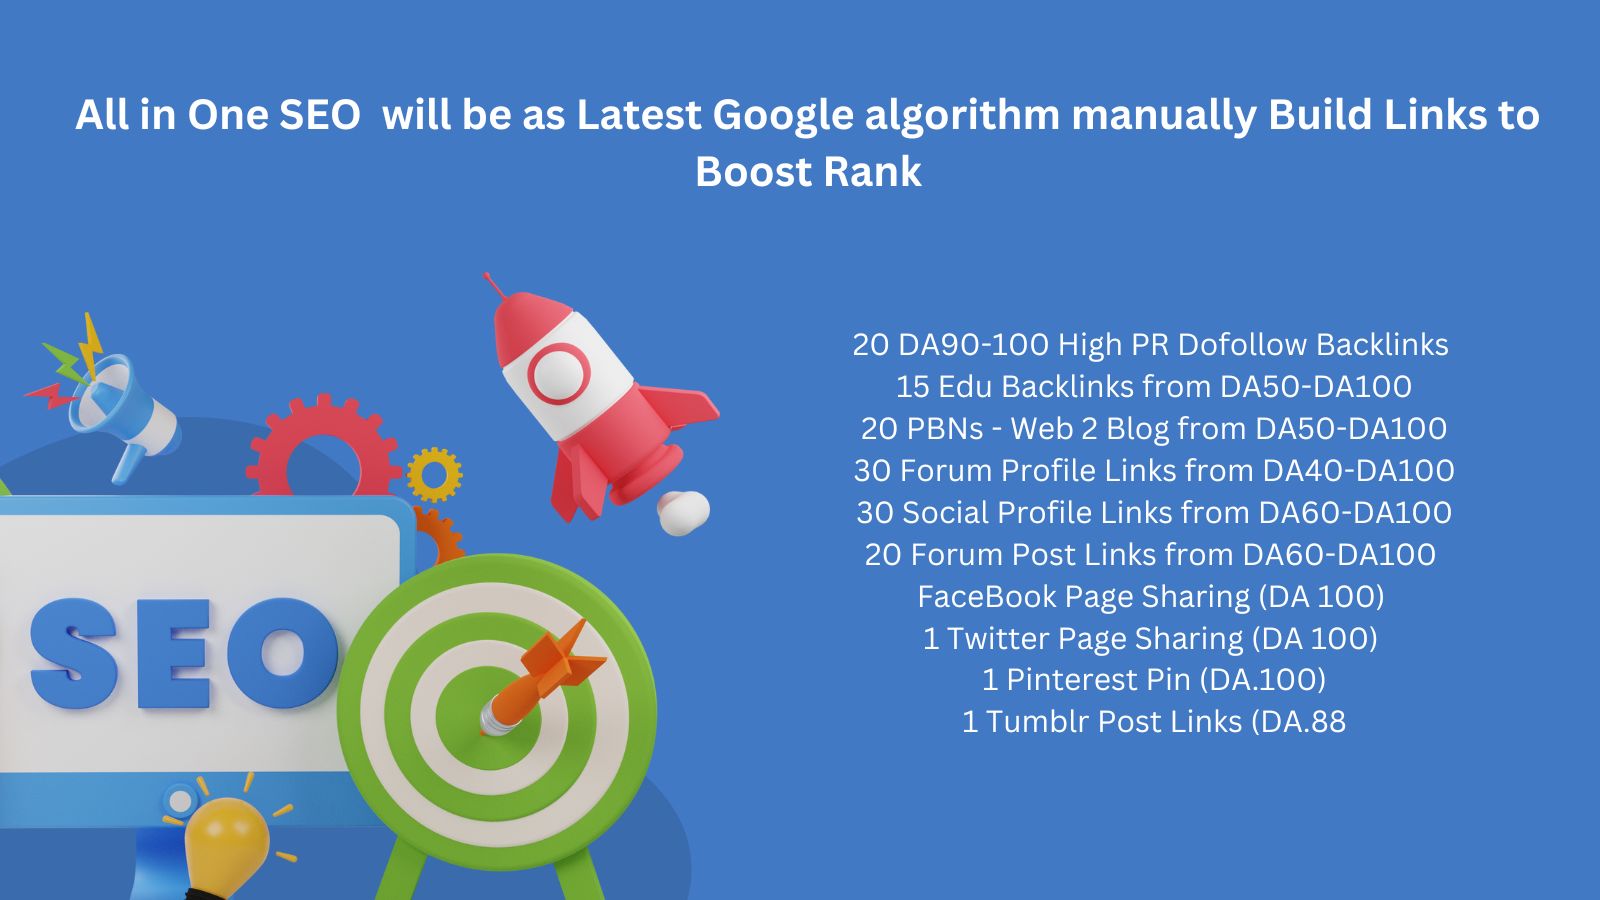 All-in-One SEO to Boost Search Engine Results